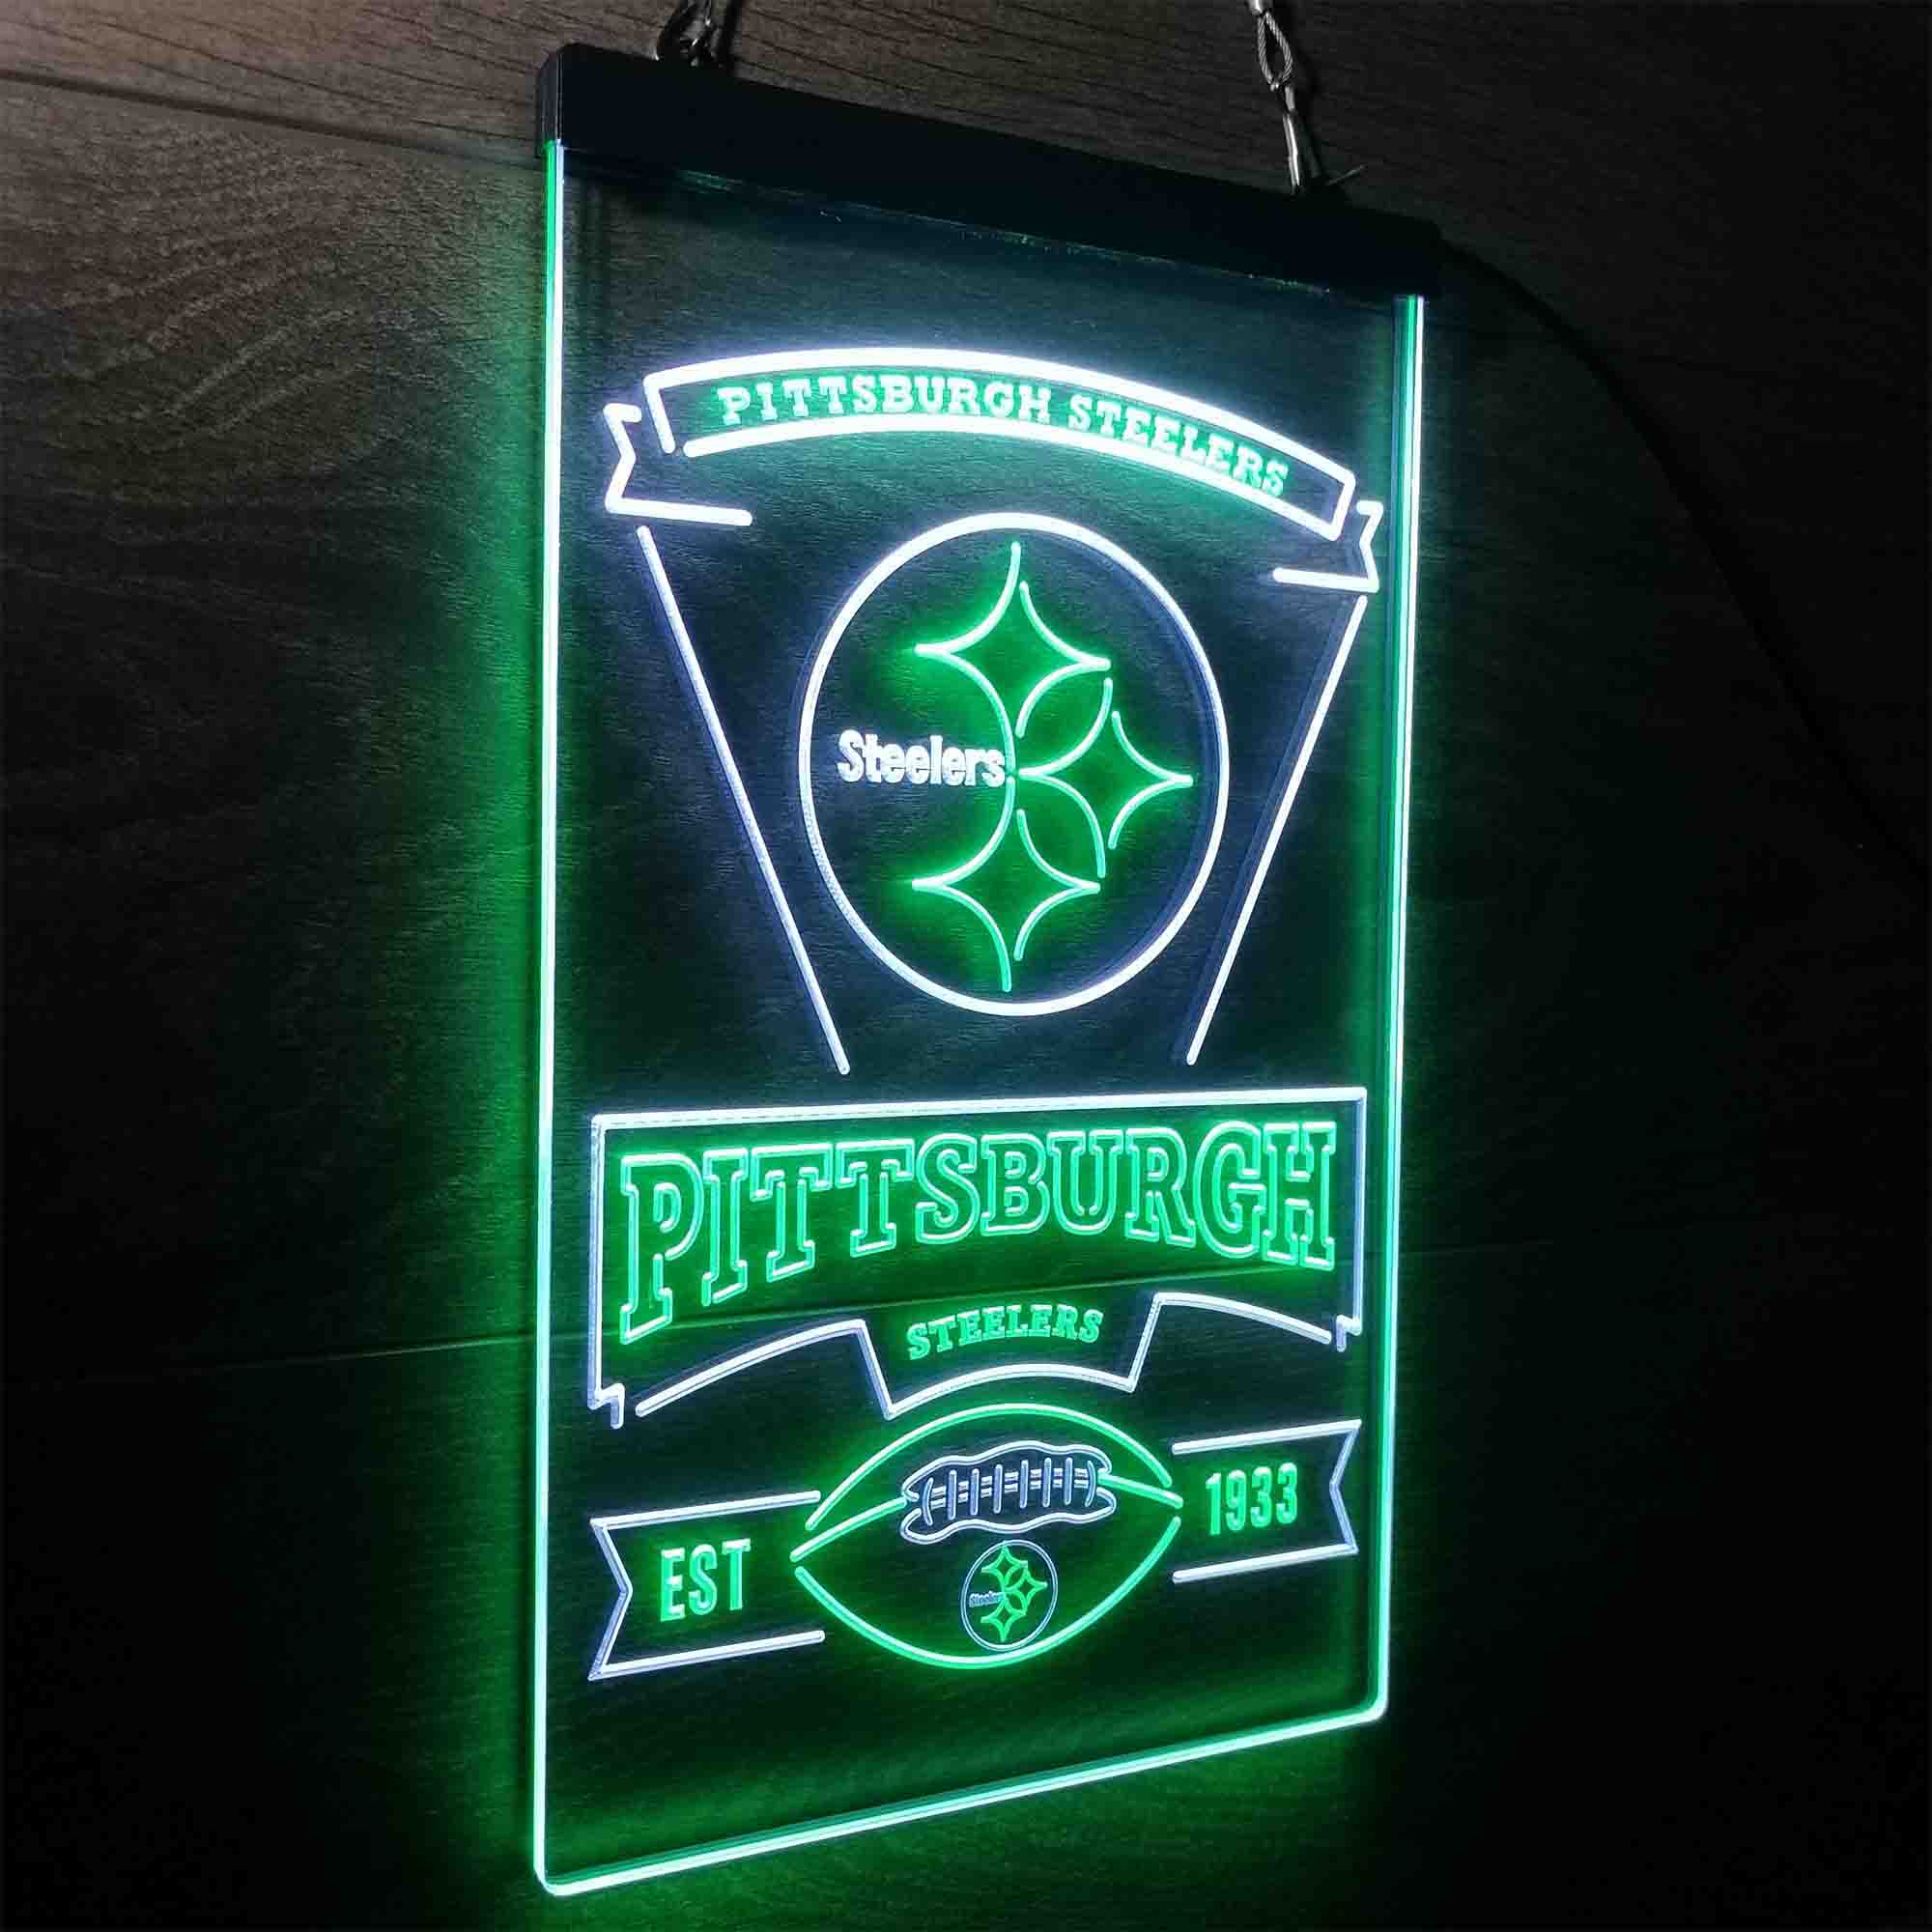 Pittsburgh Steelers Est. 1933 Neon-Like LED Sign